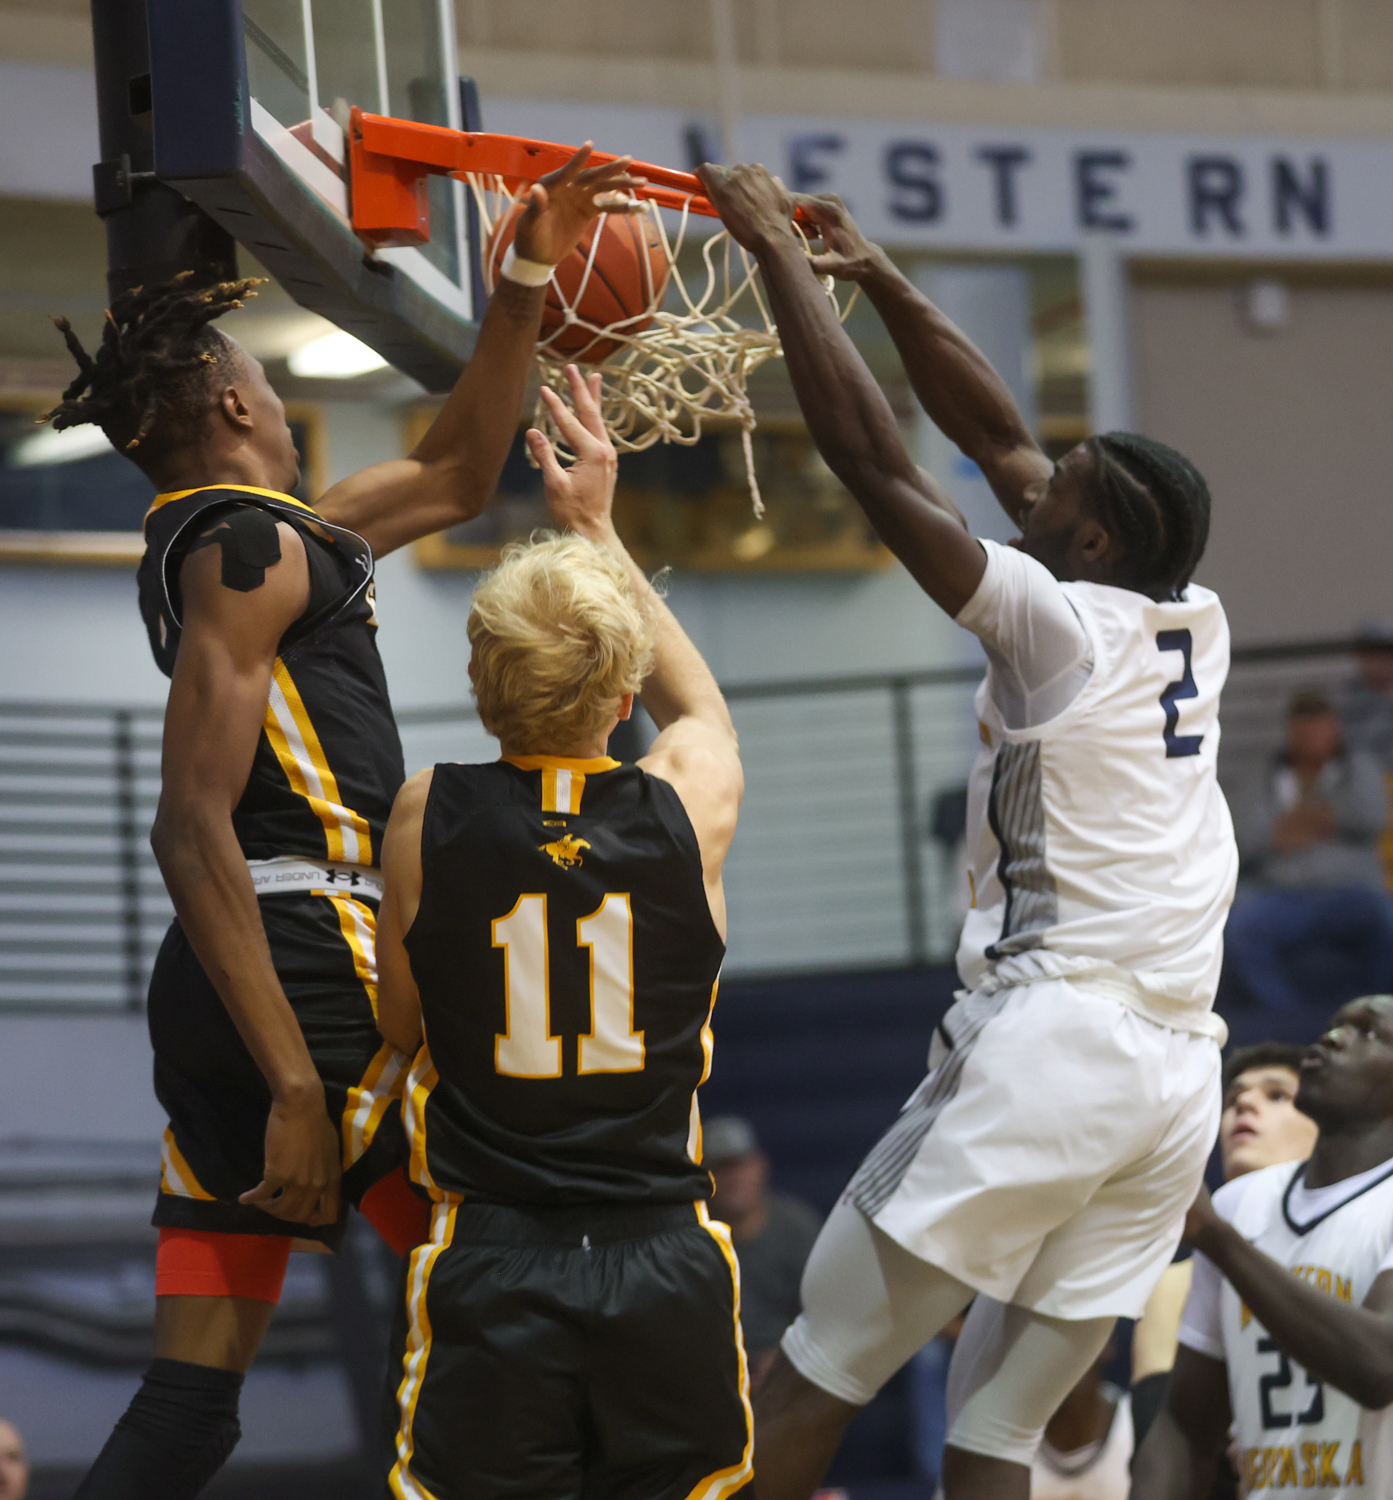 WNCC men captures win over LCCC 86-79